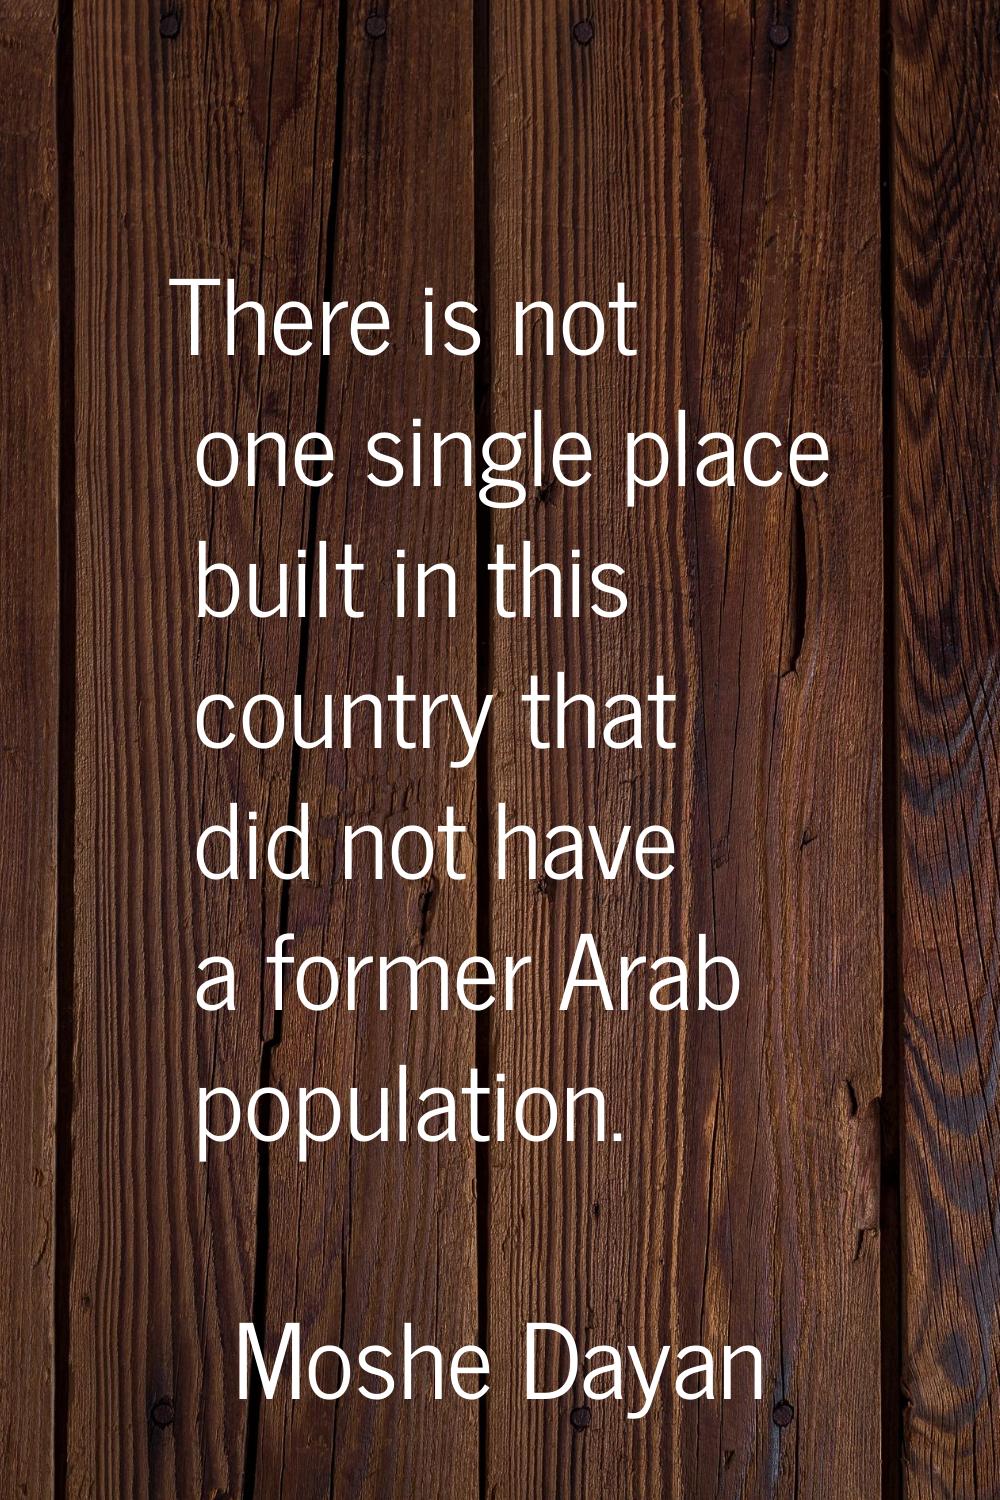 There is not one single place built in this country that did not have a former Arab population.